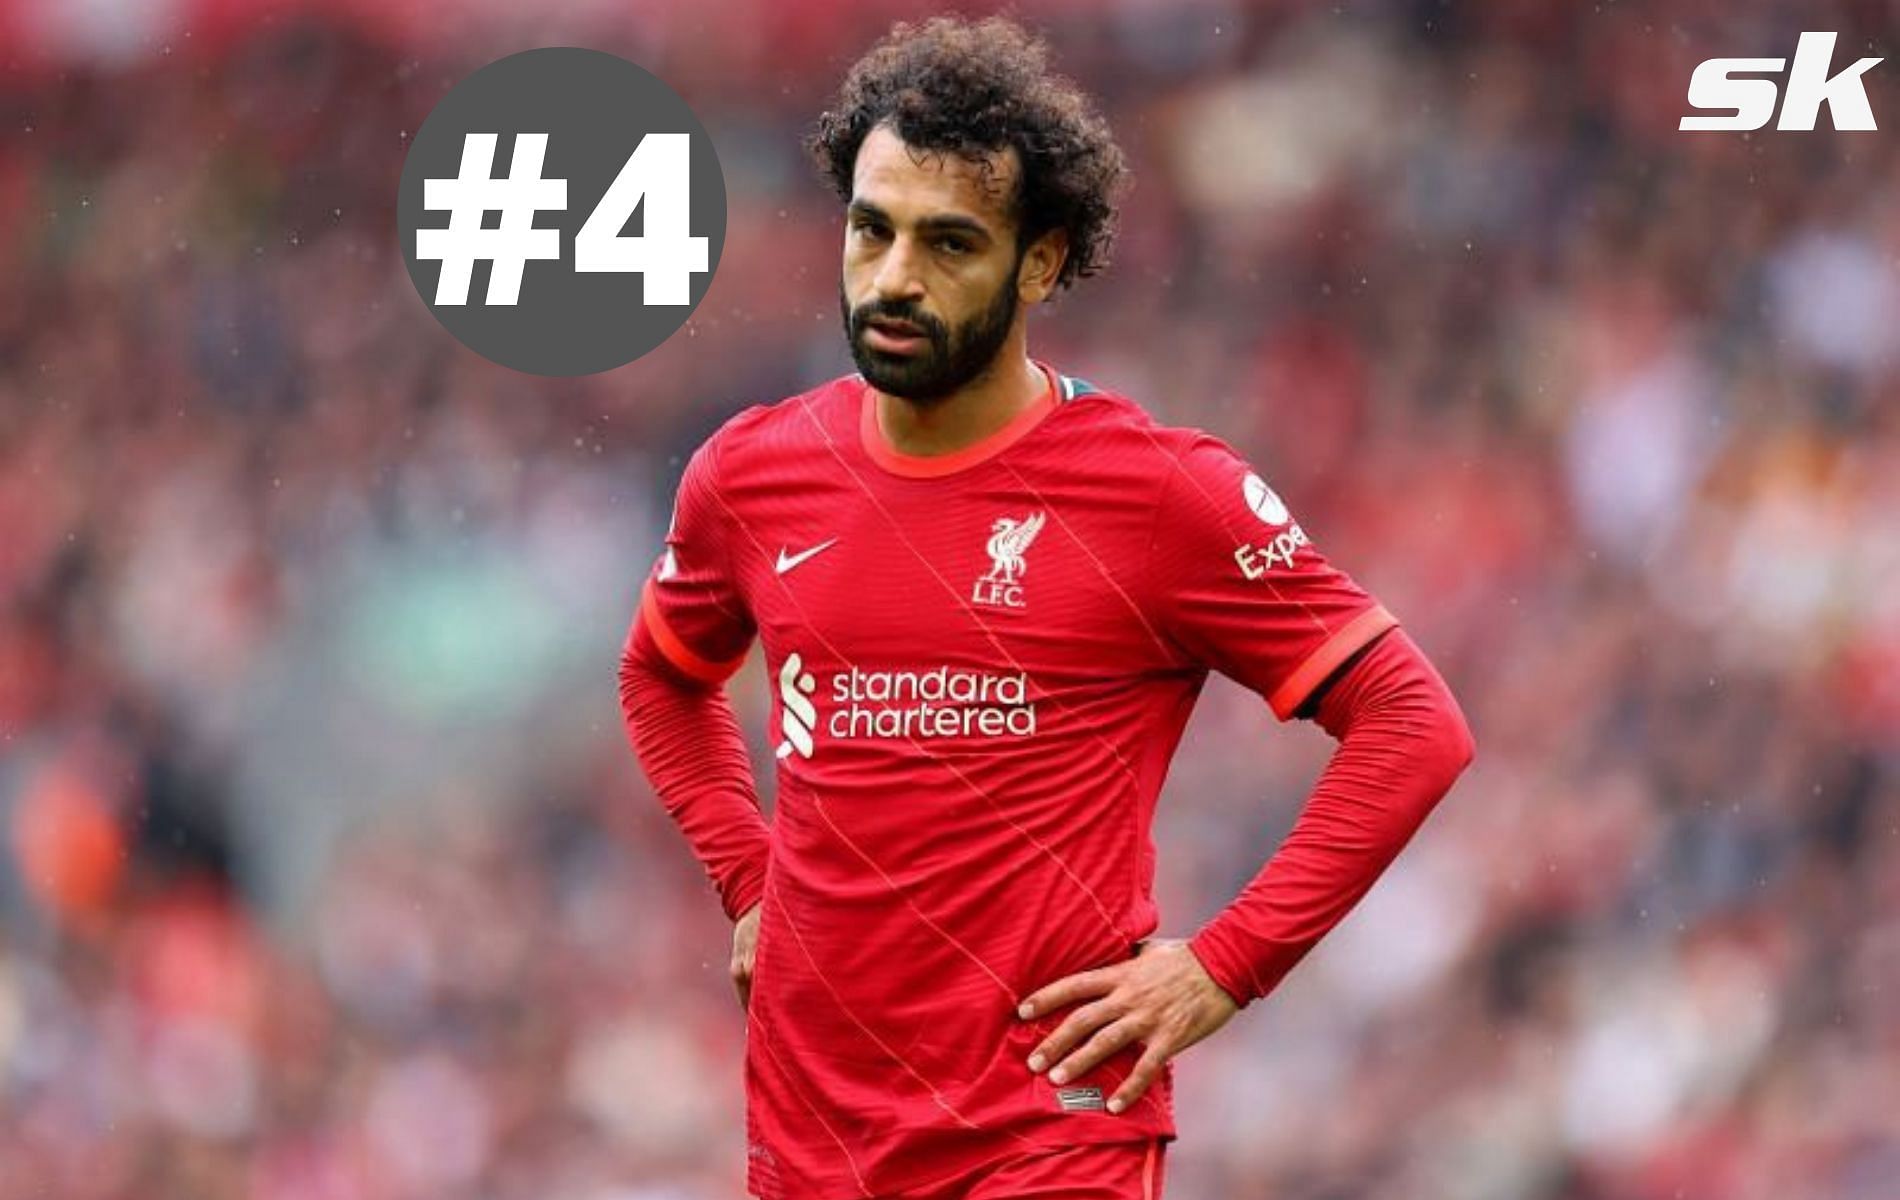 Salah is only fourth on this list!